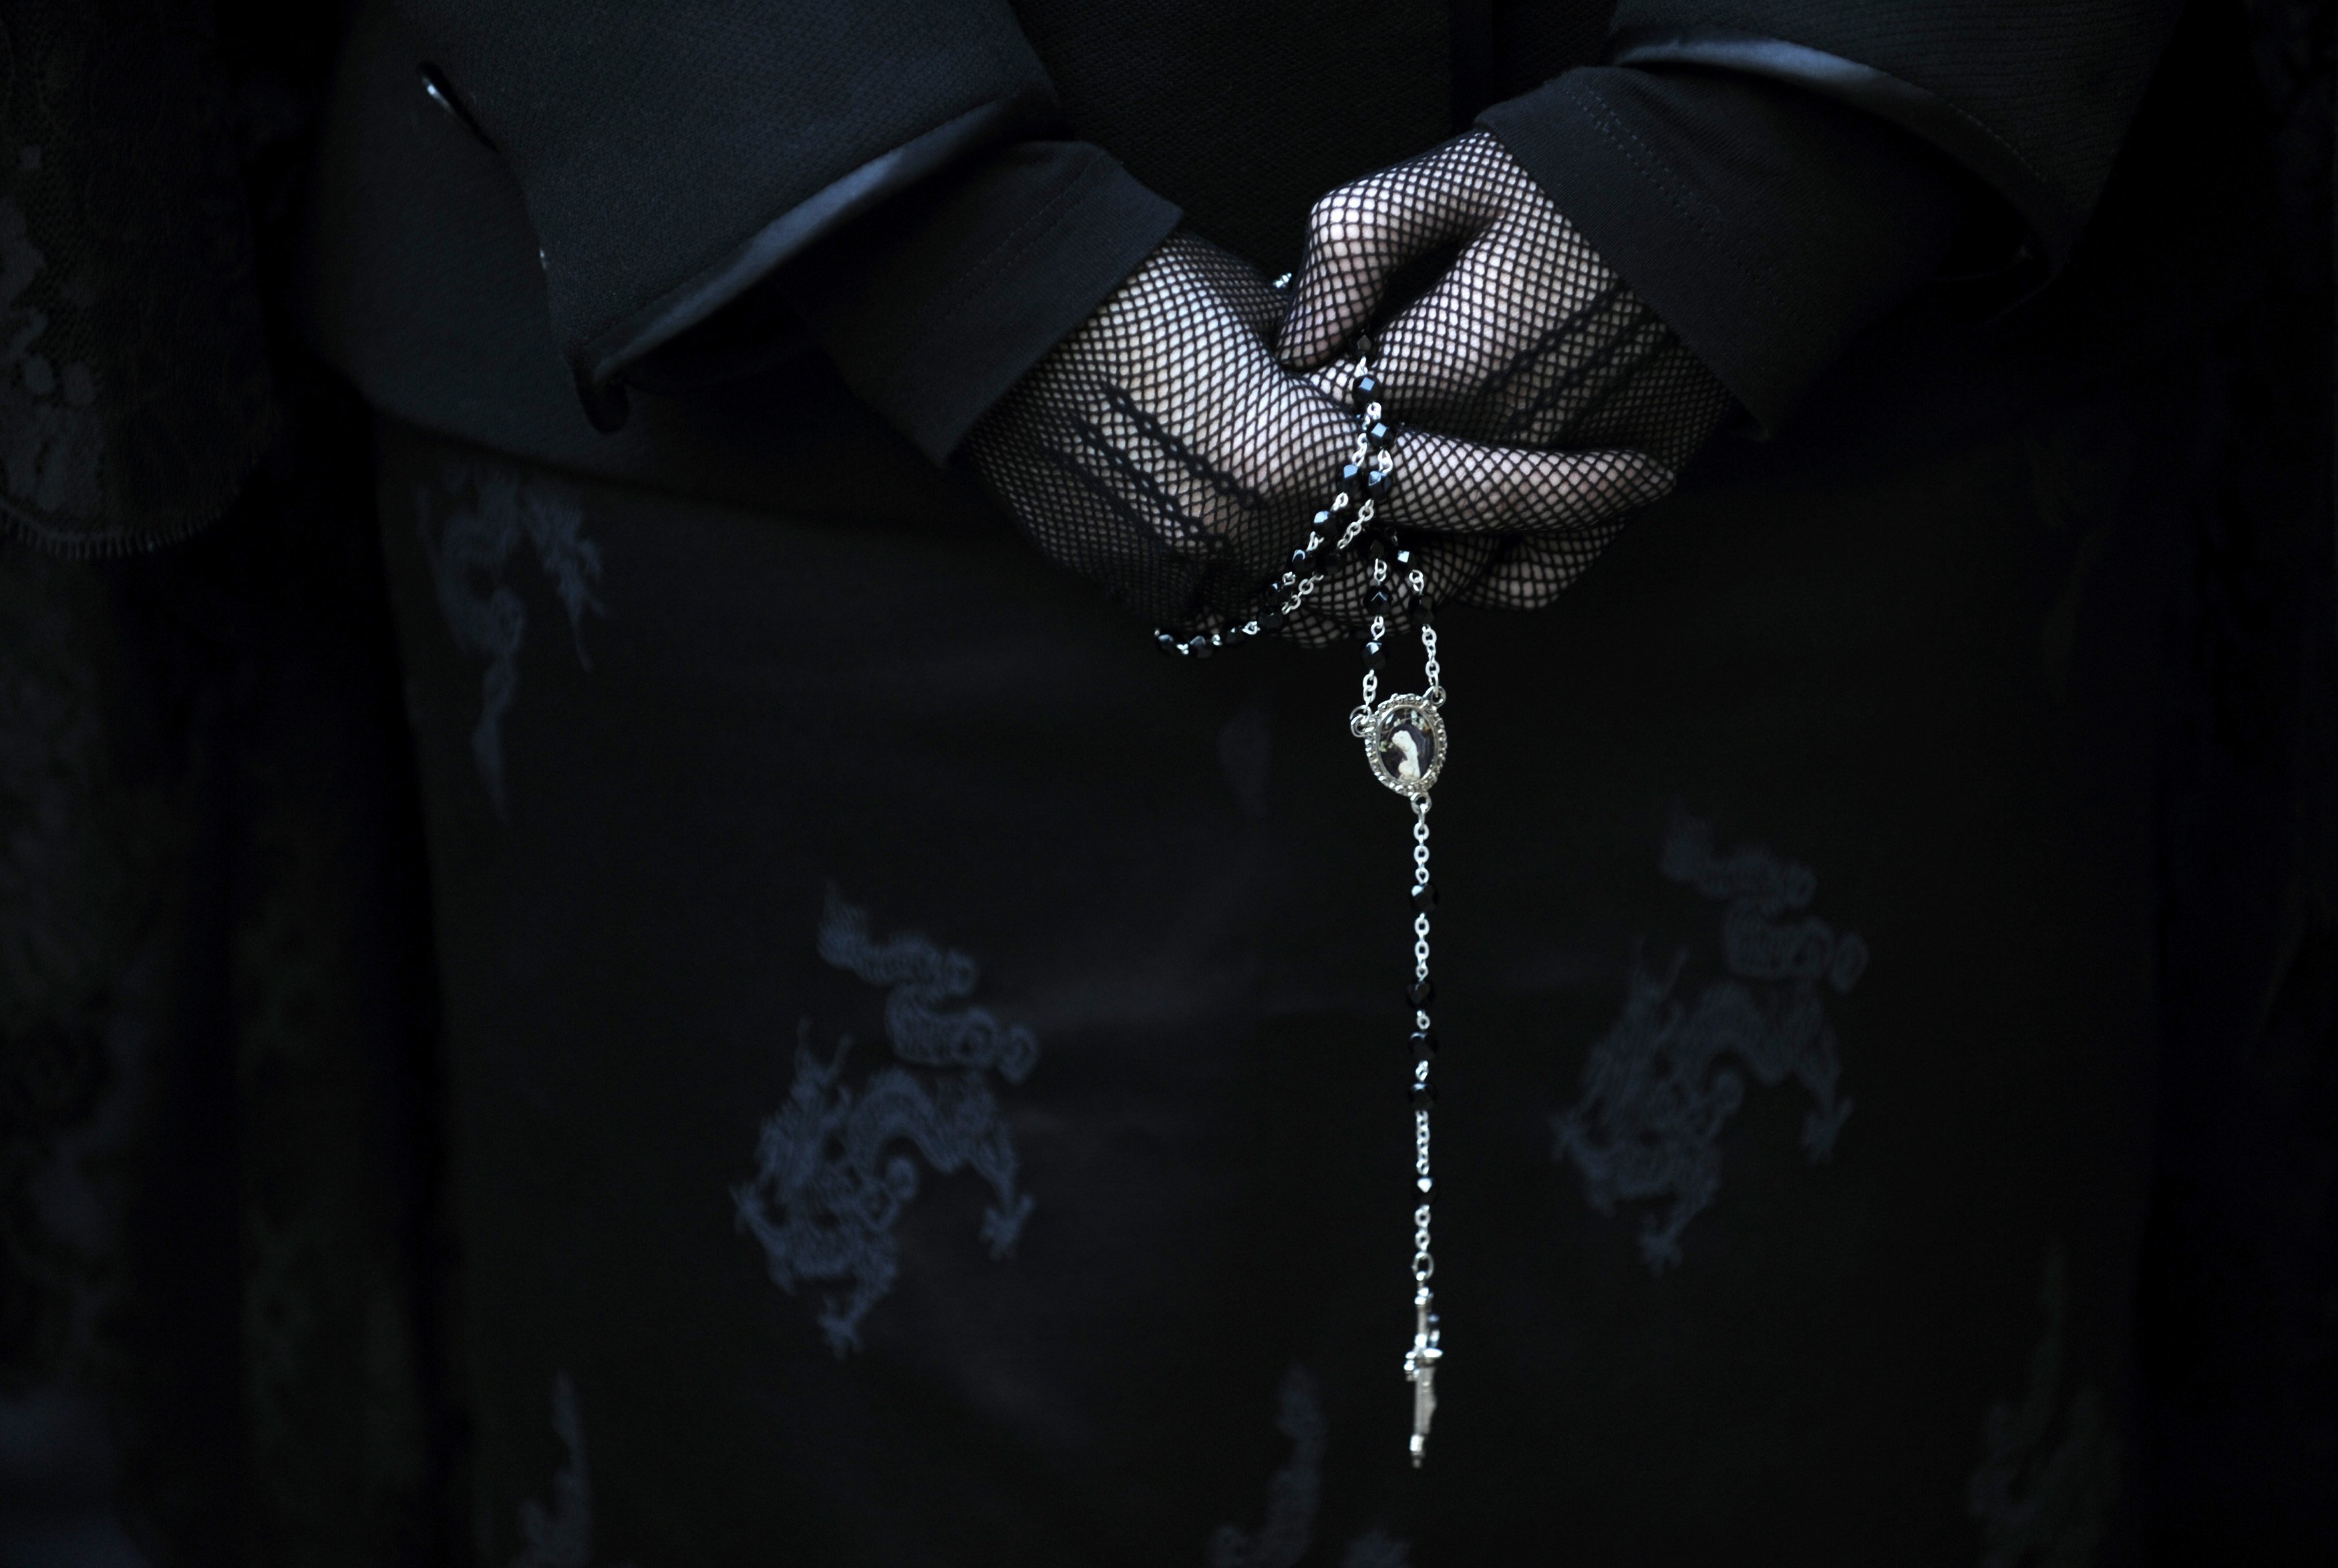 Apr. 15, 2014. A penitent takes part in the procession of the  Silencio y la Santa Cruz  brotherhood during Holy Week in Oviedo, northern Spain. Hundreds of processions take place round-the-clock during Holy Week in Spain, drawing thousands of visitors.